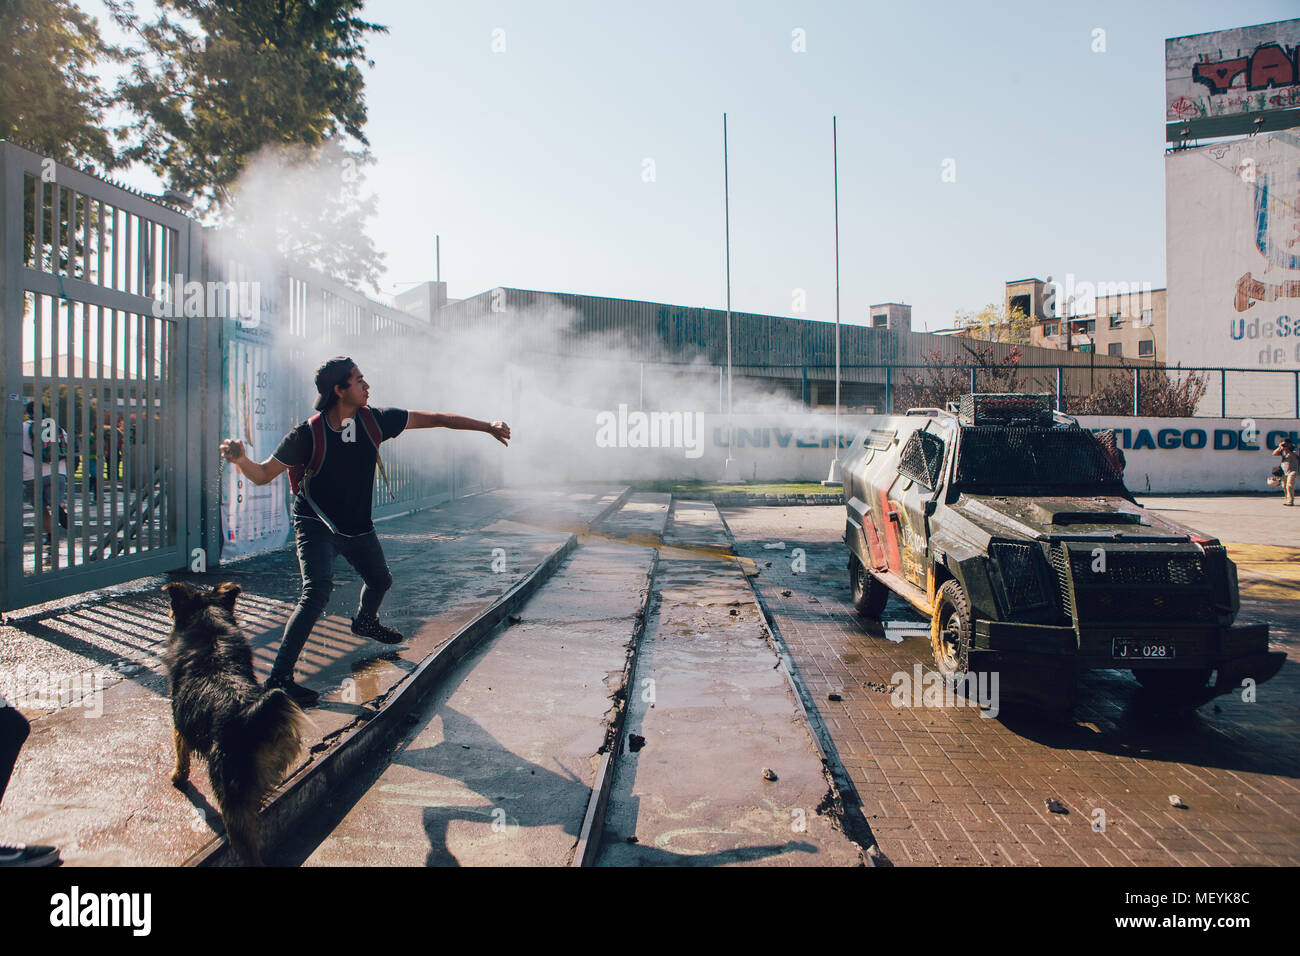 Santiago, Chile - April 19, 2018: Student stoned police vehicle at the entrance of the University of Santiago during a demonstration demanding an end  Stock Photo